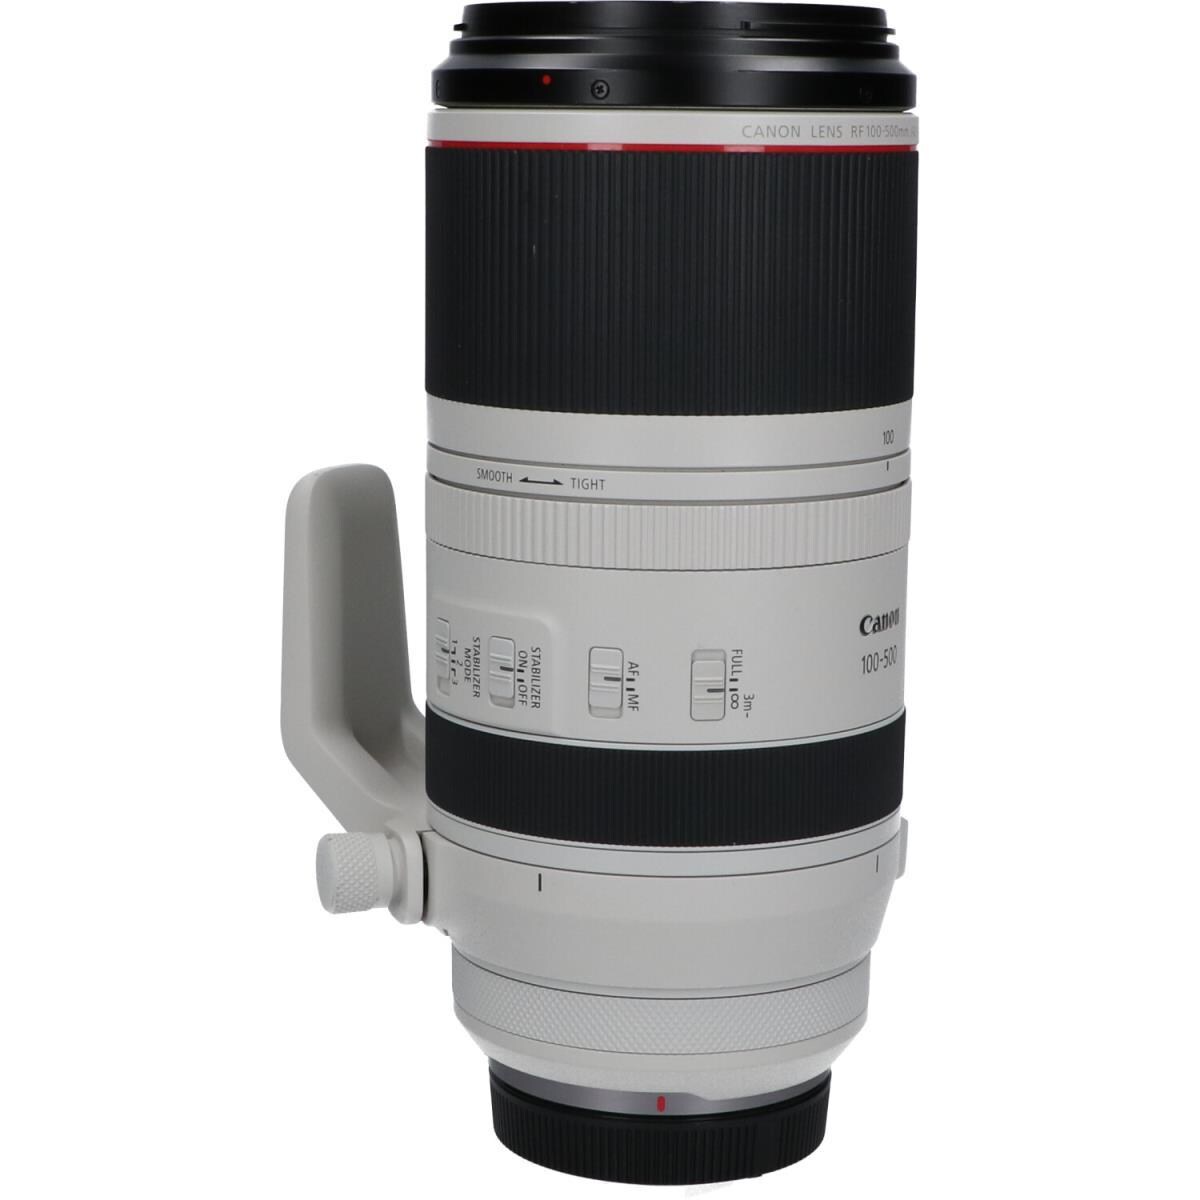 CANON RF100-500mm F4.5-7.1L IS USM